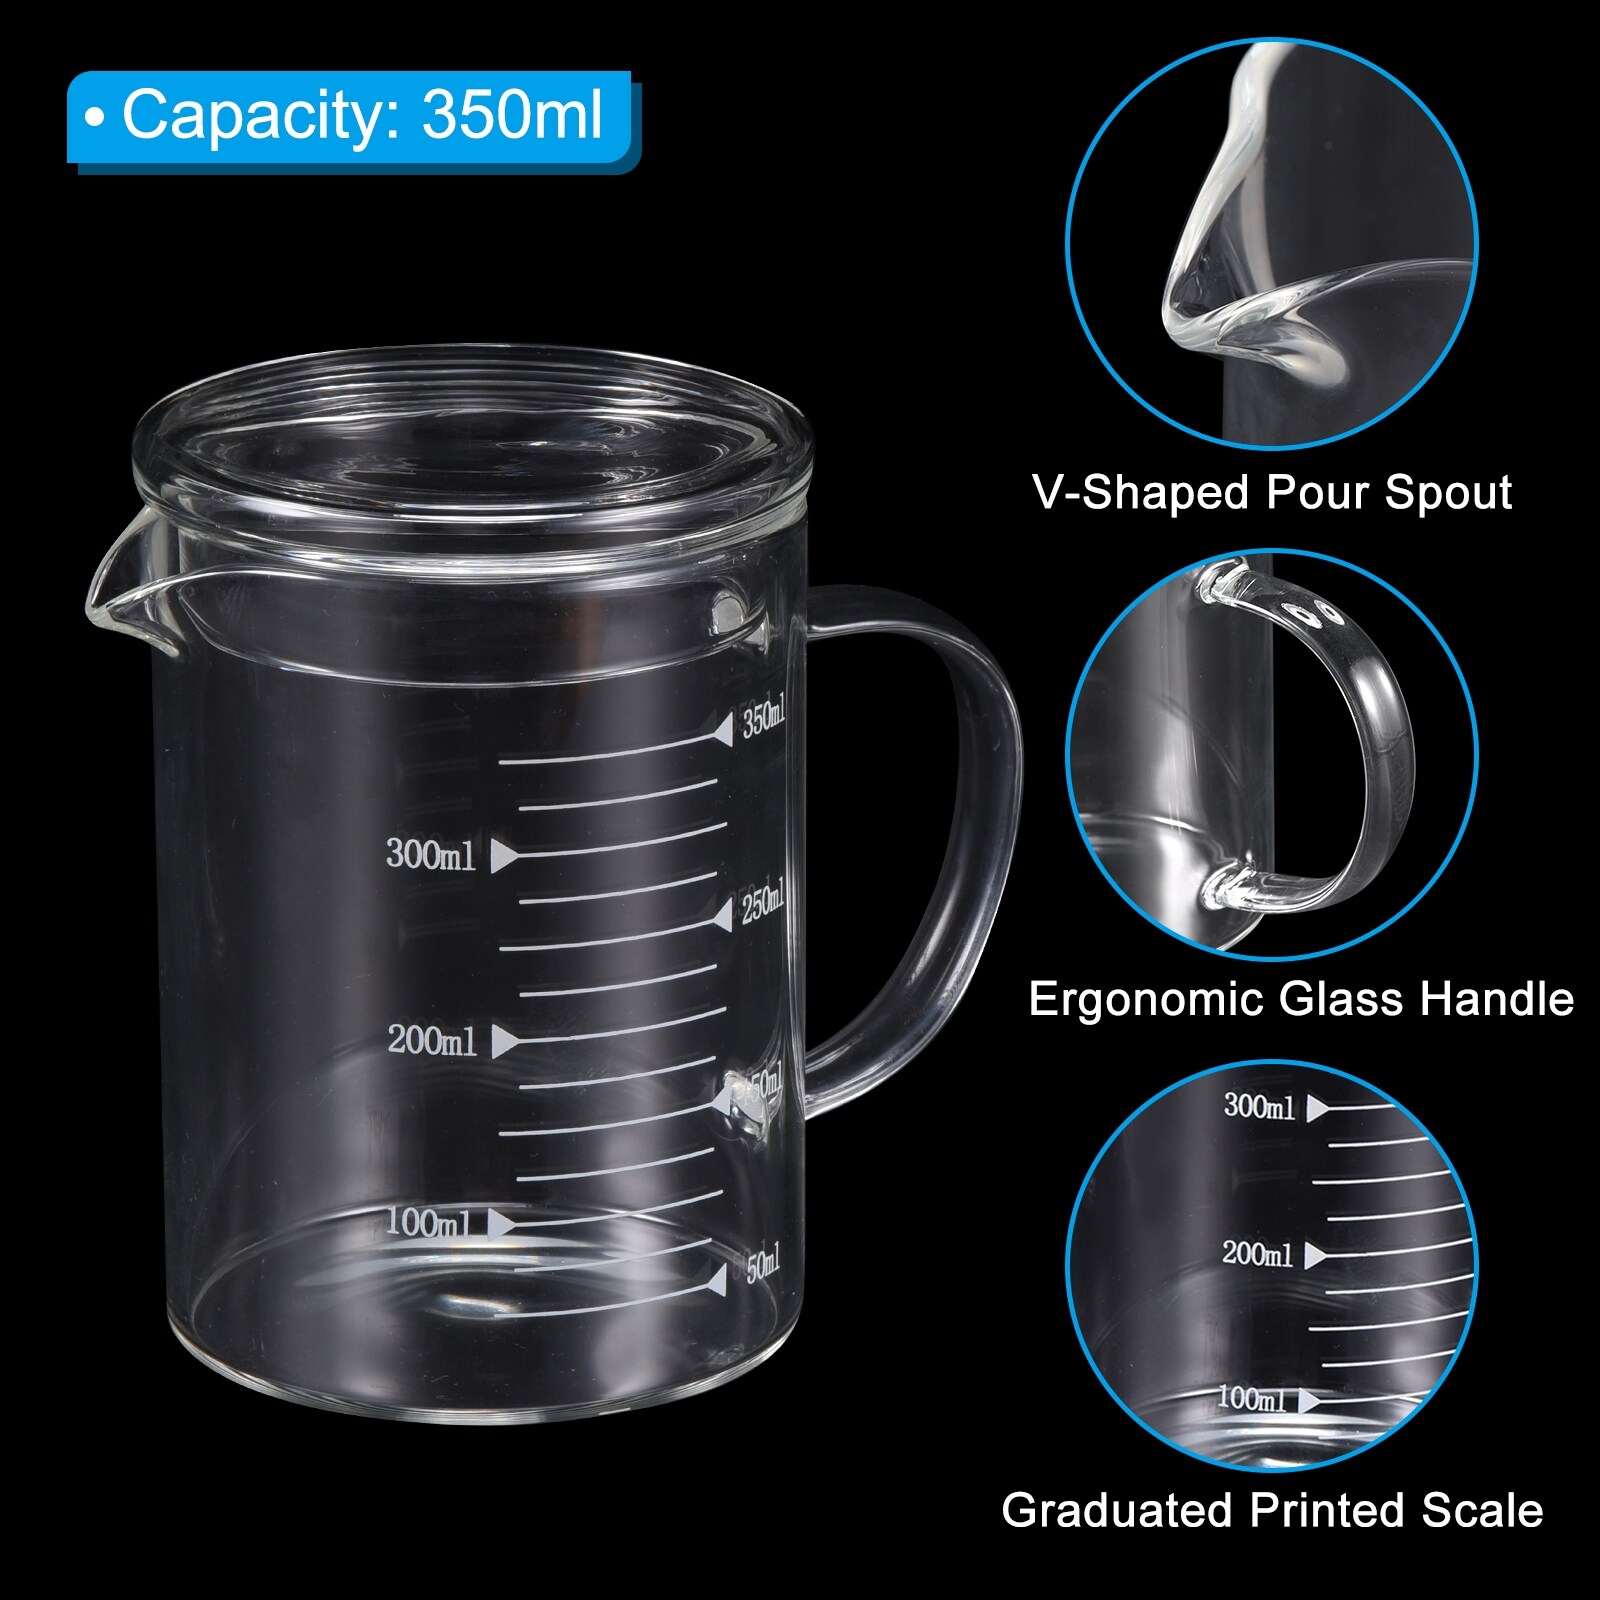 https://ak1.ostkcdn.com/images/products/is/images/direct/fd5682249ceec8a71271f90c645987bc3df08c71/350ml-Glass-Measuring-Cup%2C-3.3-Borosilicate-Glass-White-Printed-with-Glass-Lid.jpg